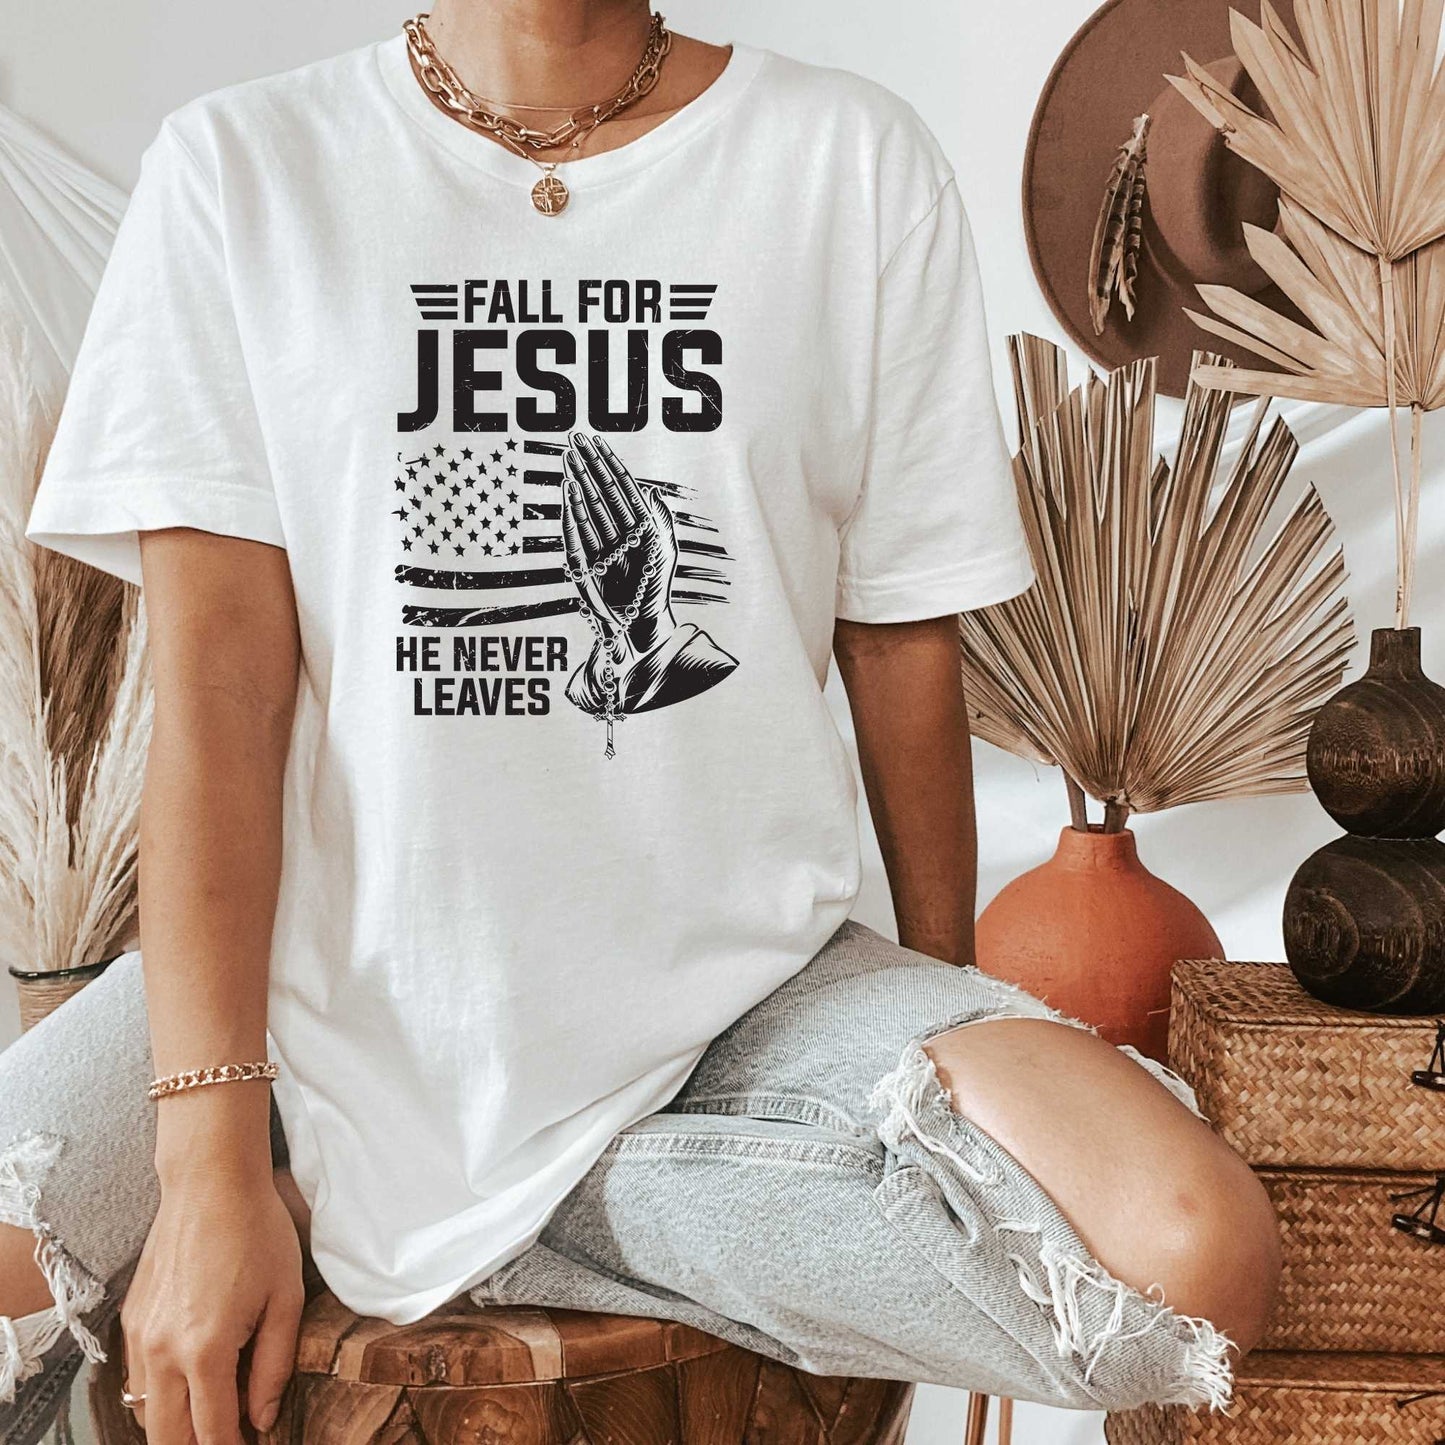 Fall for Jesus He Never Leaves, Christian T-Shirts for Men and Women